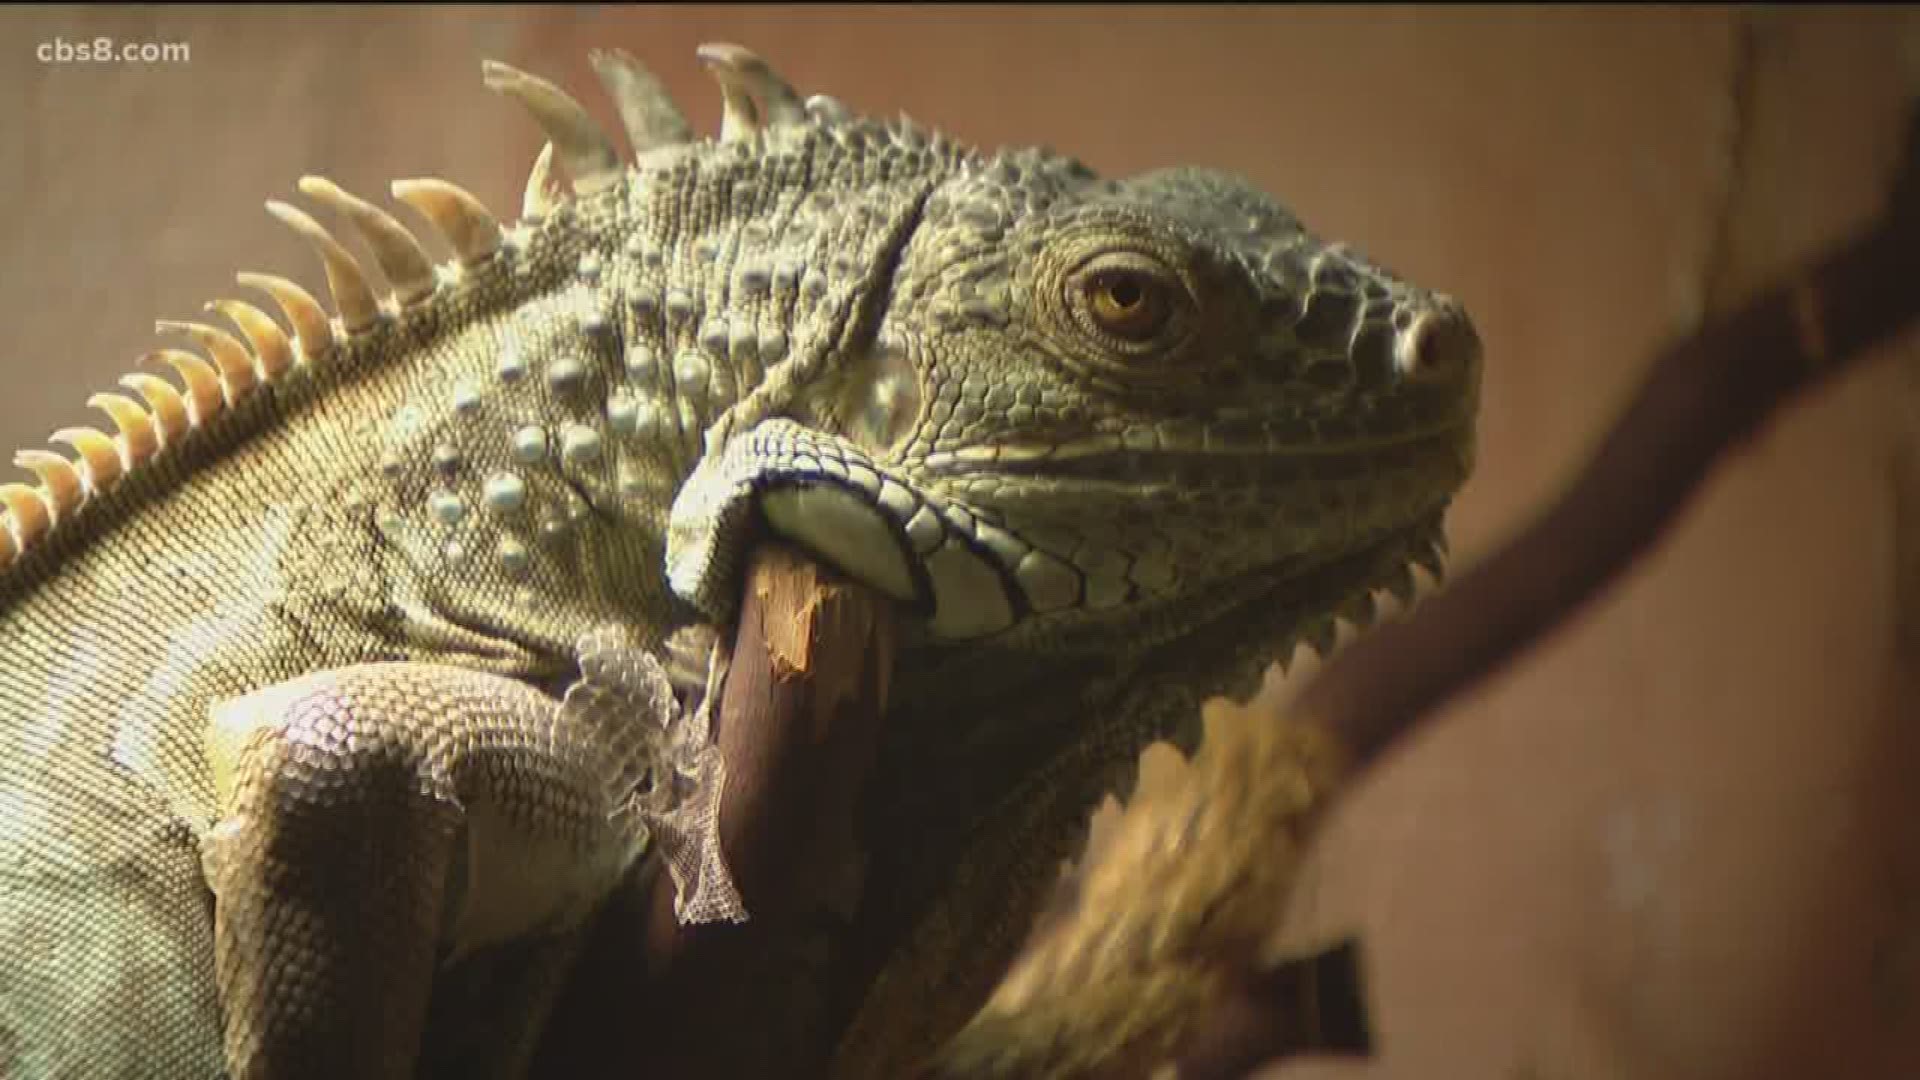 There is a lizard on the loose in the North County. The monitor lizard has been spotted in an Escondido neighborhood several times over the past year. As News 8's photojournalist Tim Blodgett tells us, it is a big enough to potentially cause some problems for pets.